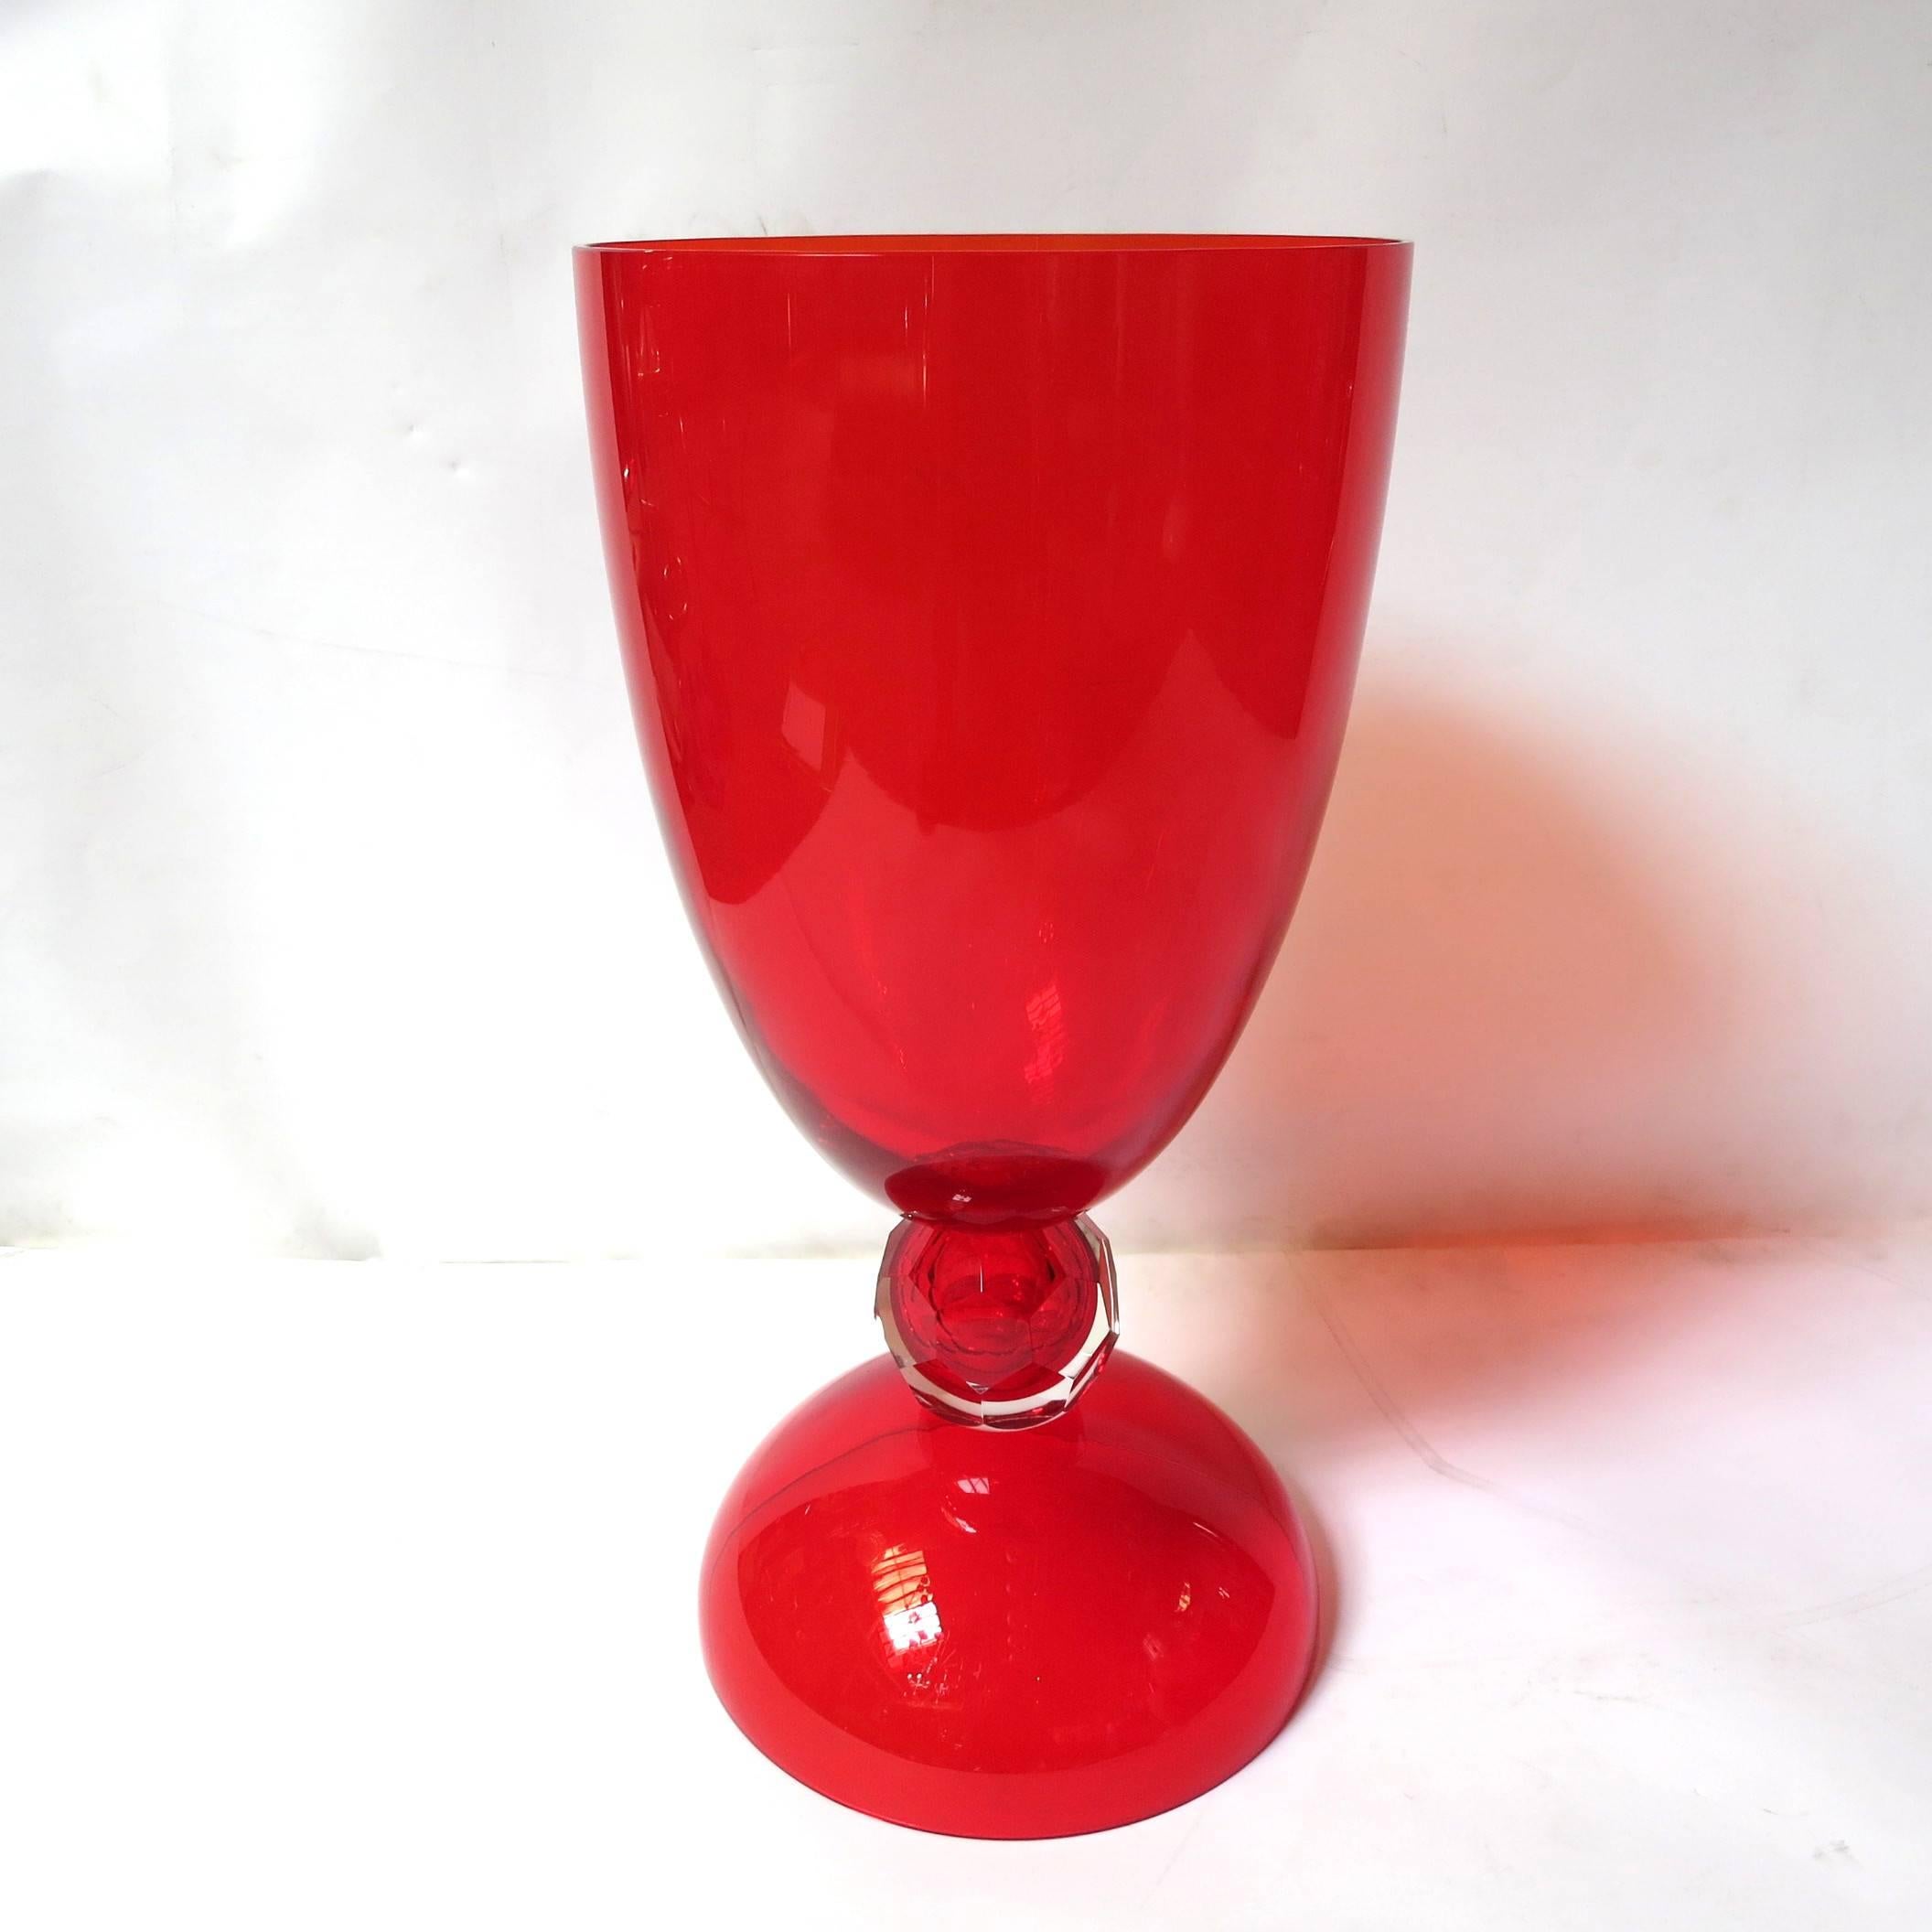 Red Murano glass urn or vase designed by Alberto Dona for Fabio Ltd  
Signed “Alberto Dona’ Murano” on the base / Made in Italy 
Height: 24 inches / Diameter: 12 inches 
2 in stock in Palm Springs currently ON 40% OFF SALE for $1,499 each !!! 
Order